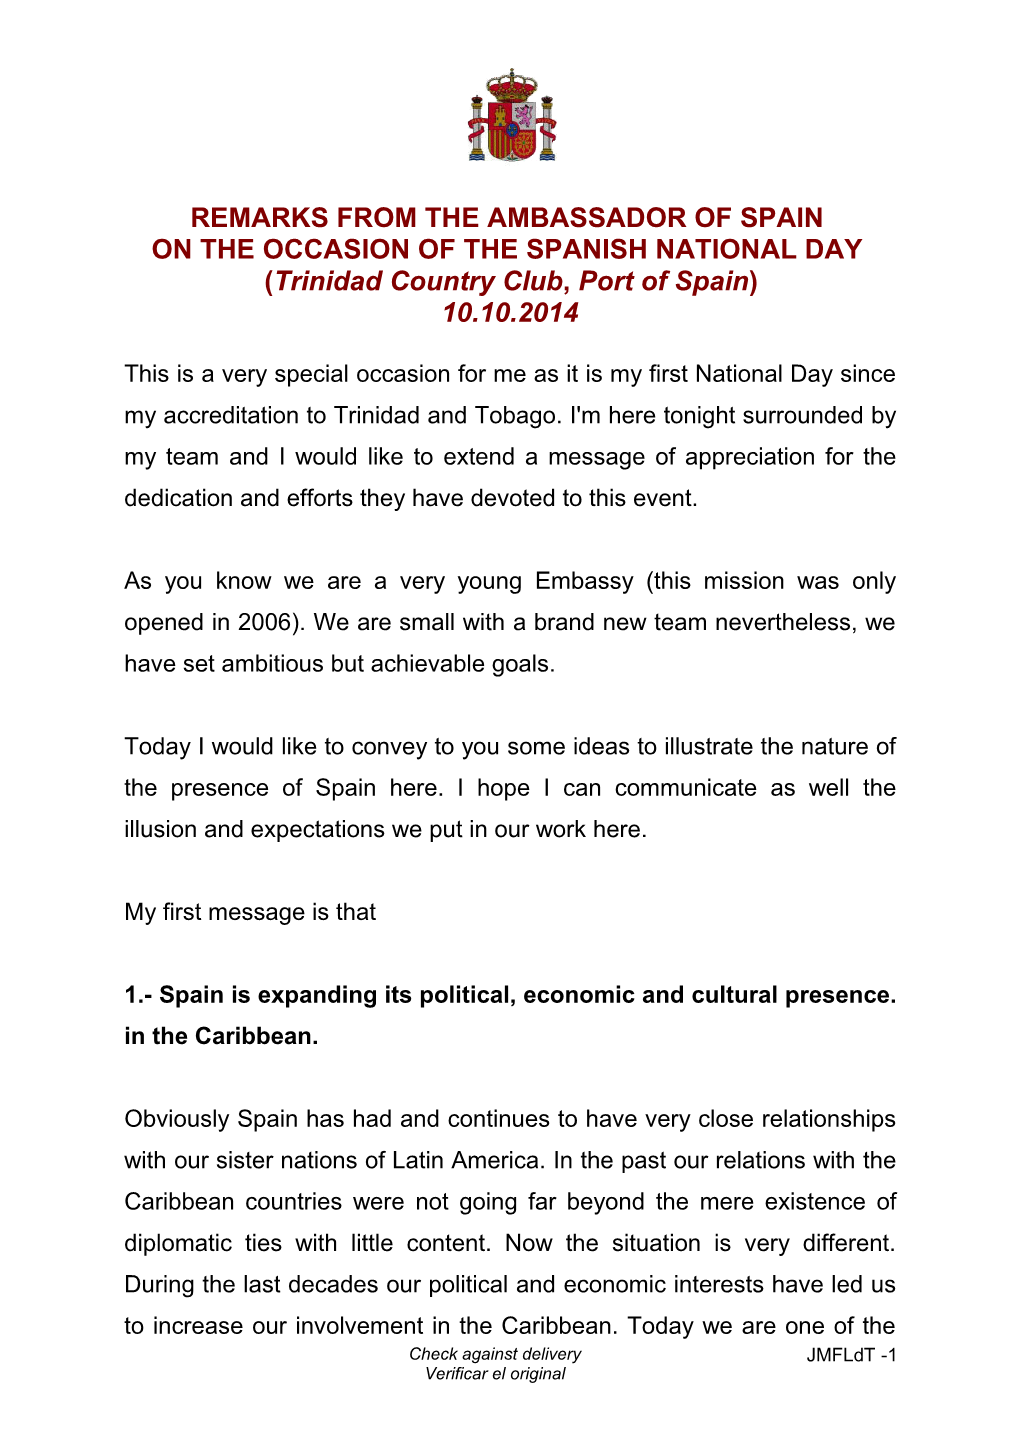 Draft Article for Newsday on the Occasion of the Spanish National Day (12